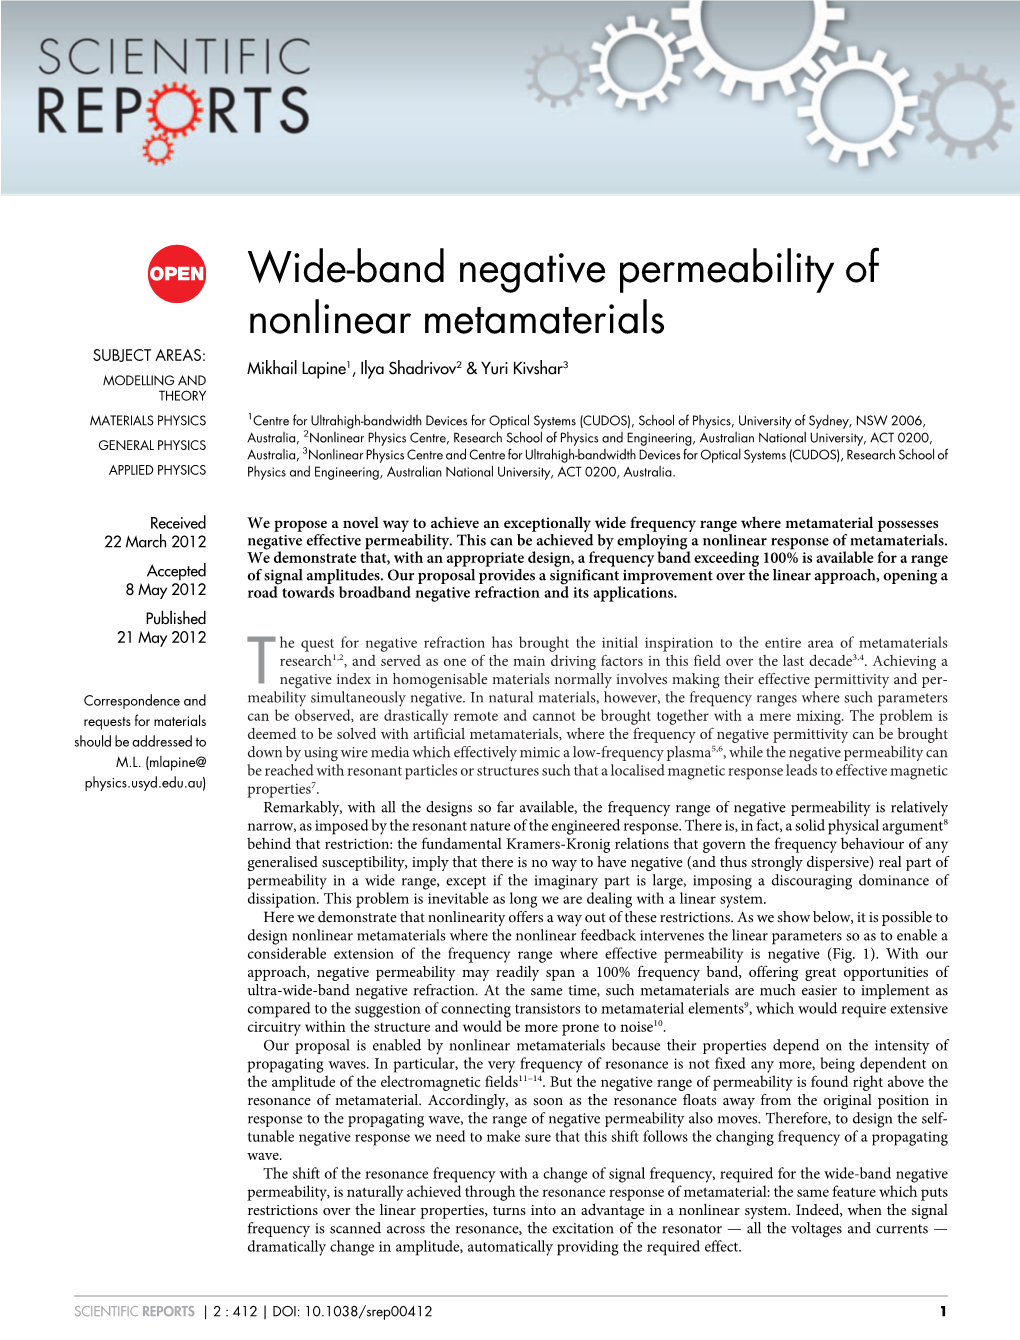 Wide-Band Negative Permeability of Nonlinear Metamaterials